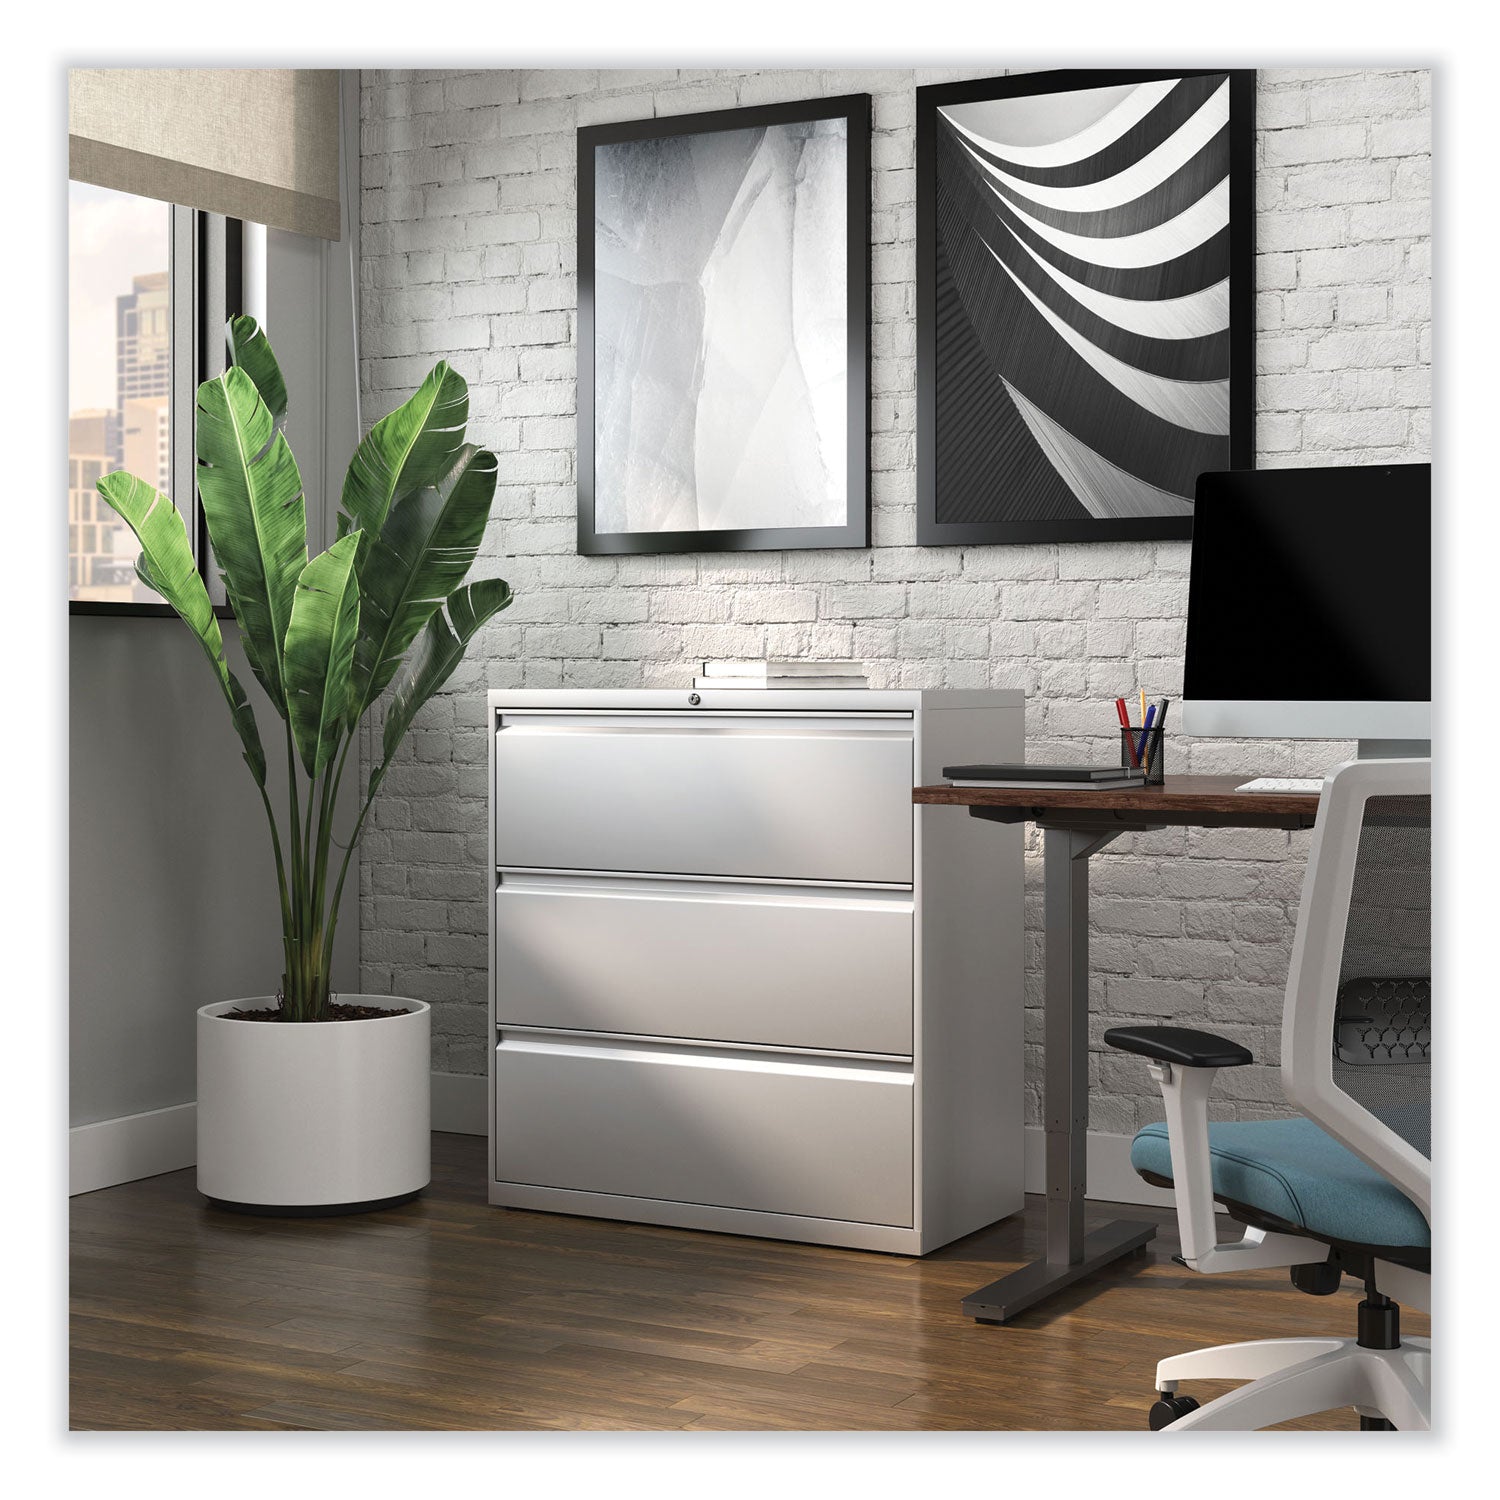 lateral-file-3-legal-letter-a4-a5-size-file-drawers-light-gray-36-x-1863-x-4025_alehlf3641lg - 7